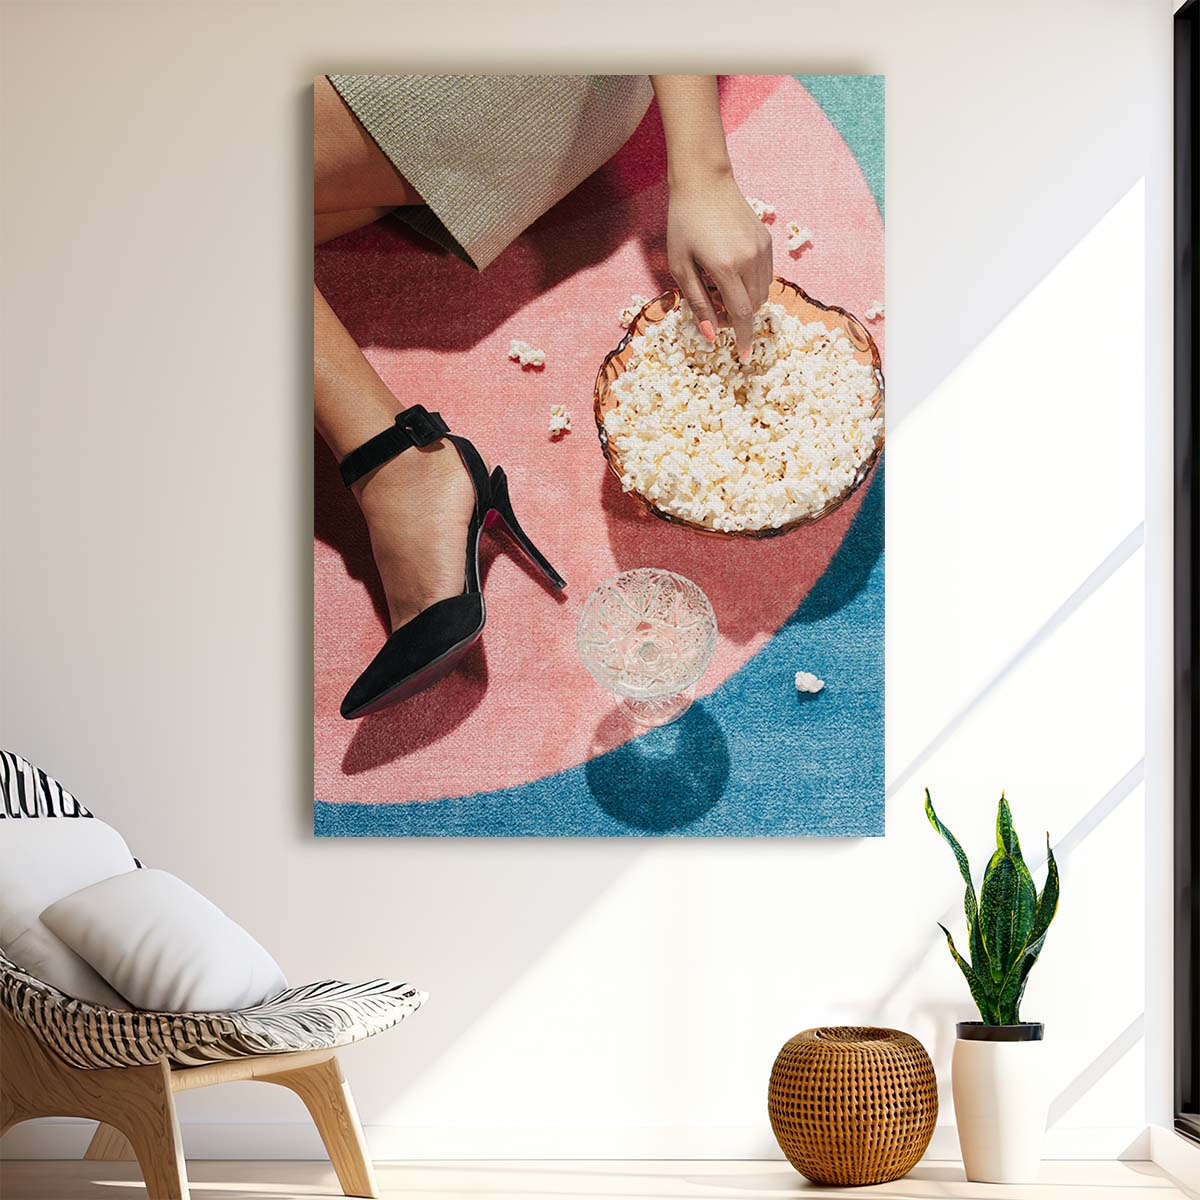 Vintage Pastel High Heels & Popcorn Fashion Photography Portrait by Luxuriance Designs, made in USA